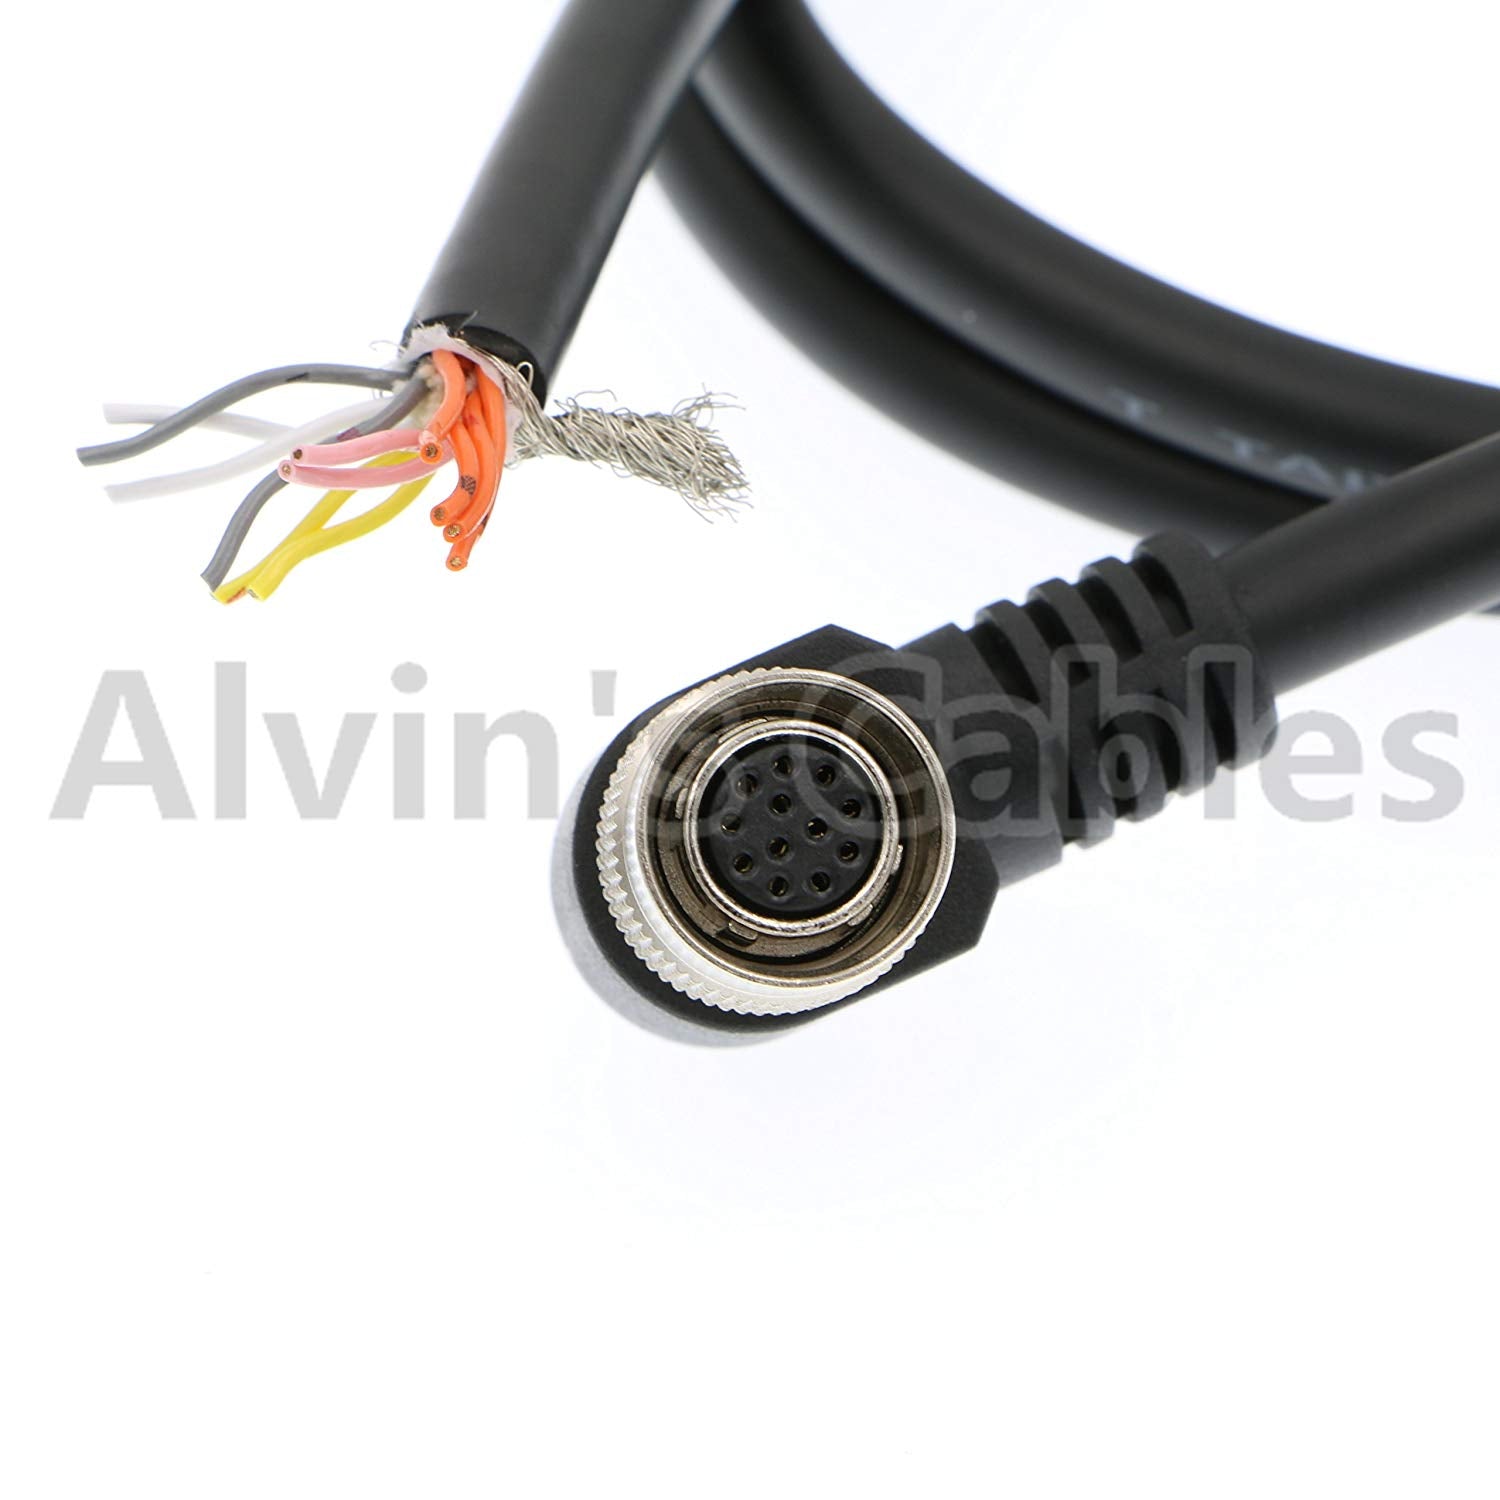 Alvin's Cables 12 Pin Hirose Female Right Angle to Open End Shield Cable for Sony Basler Cameras